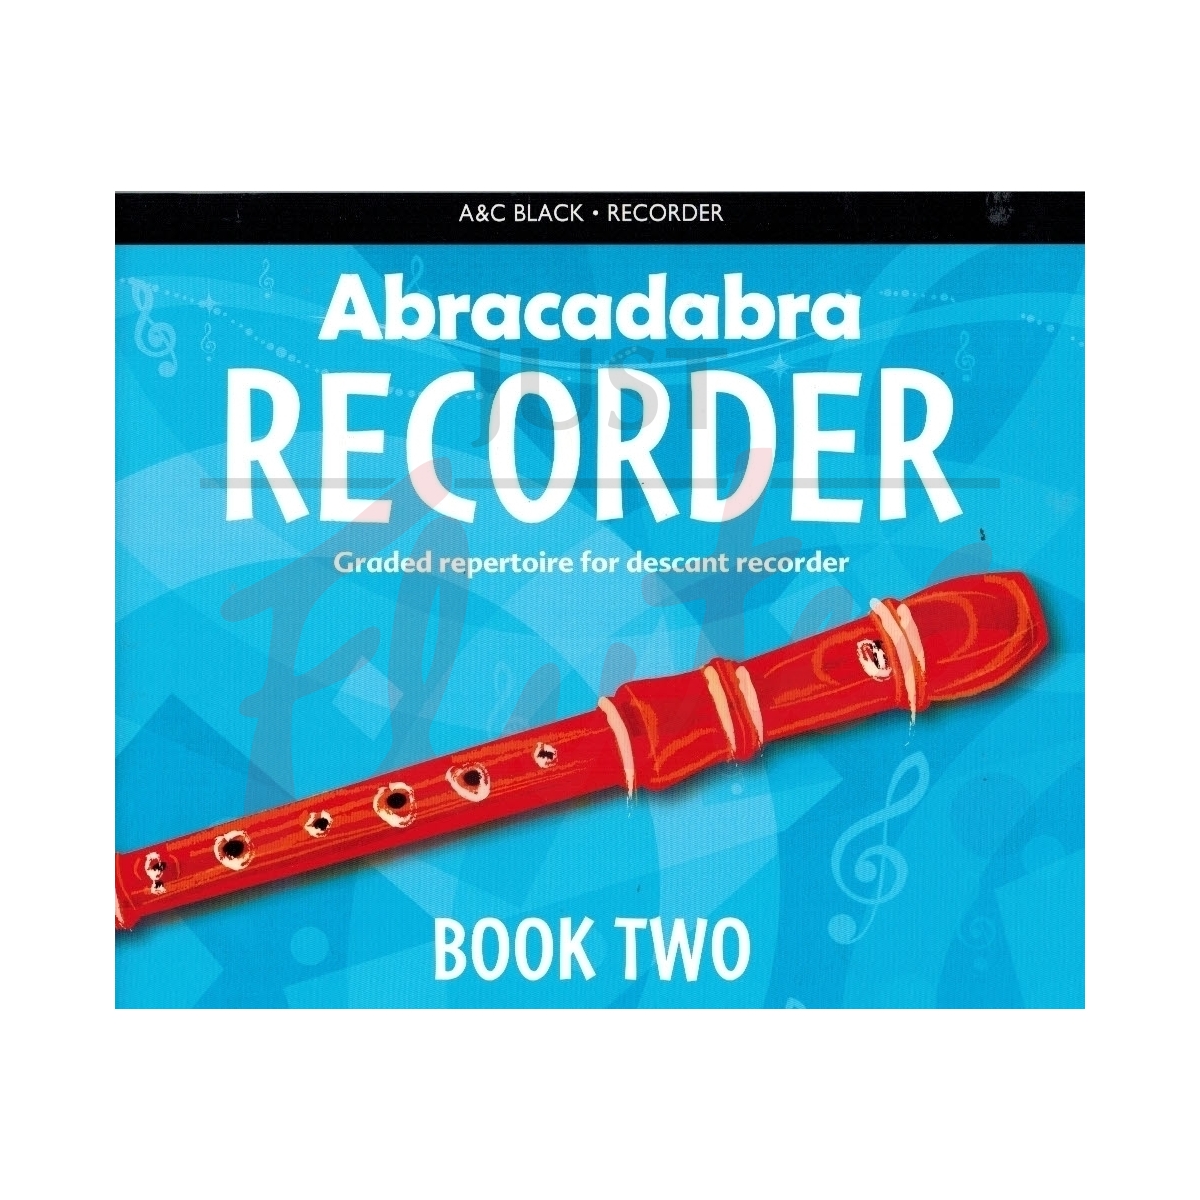 Abracadabra Recorder 2: 23 Graded Songs and Tunes